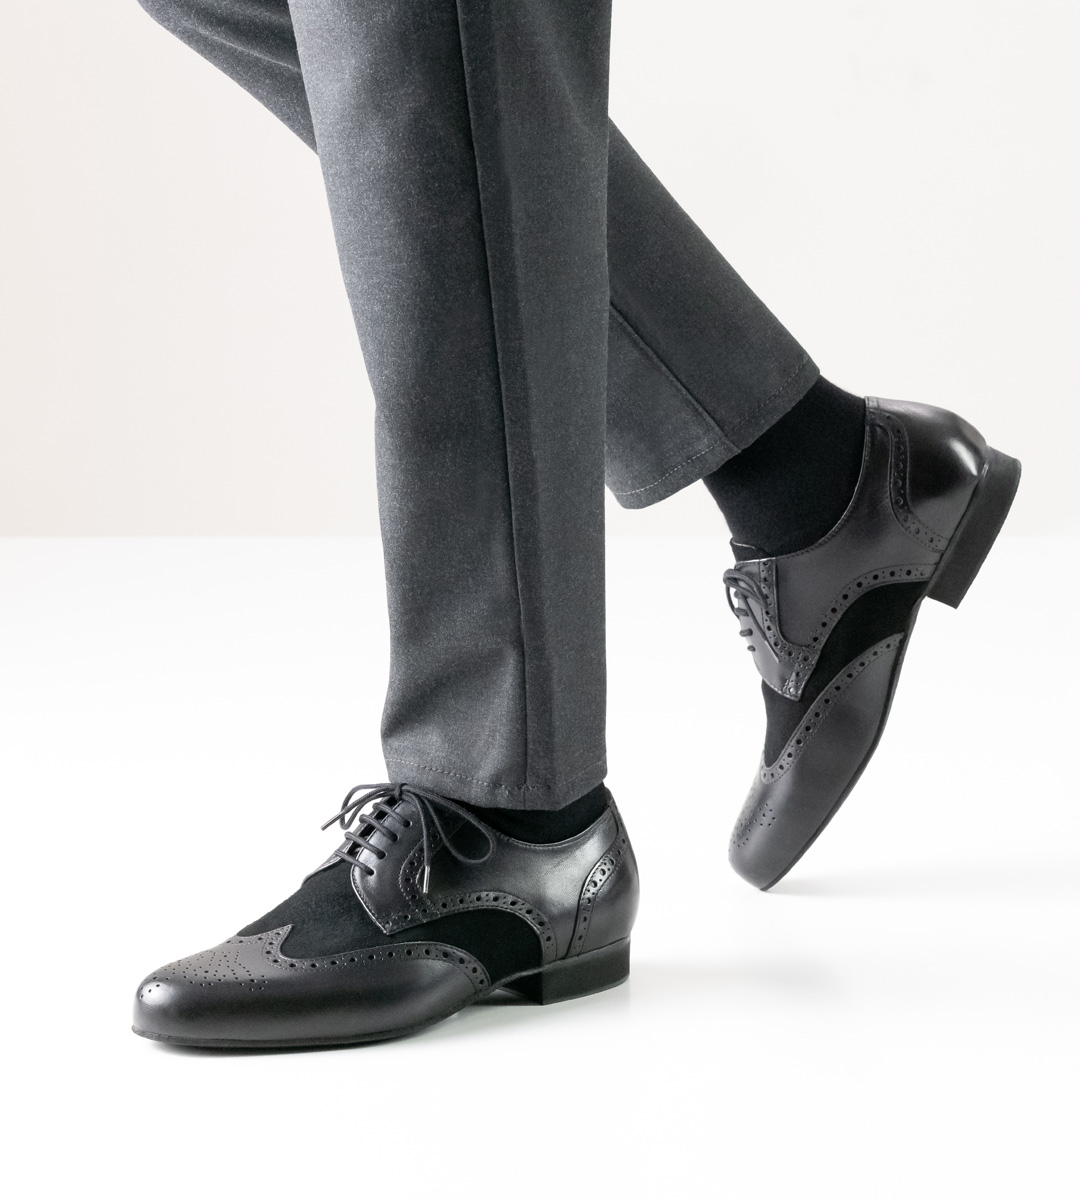 Werner Kern men's dance shoe in black suede and leather in combination with trousers in grey